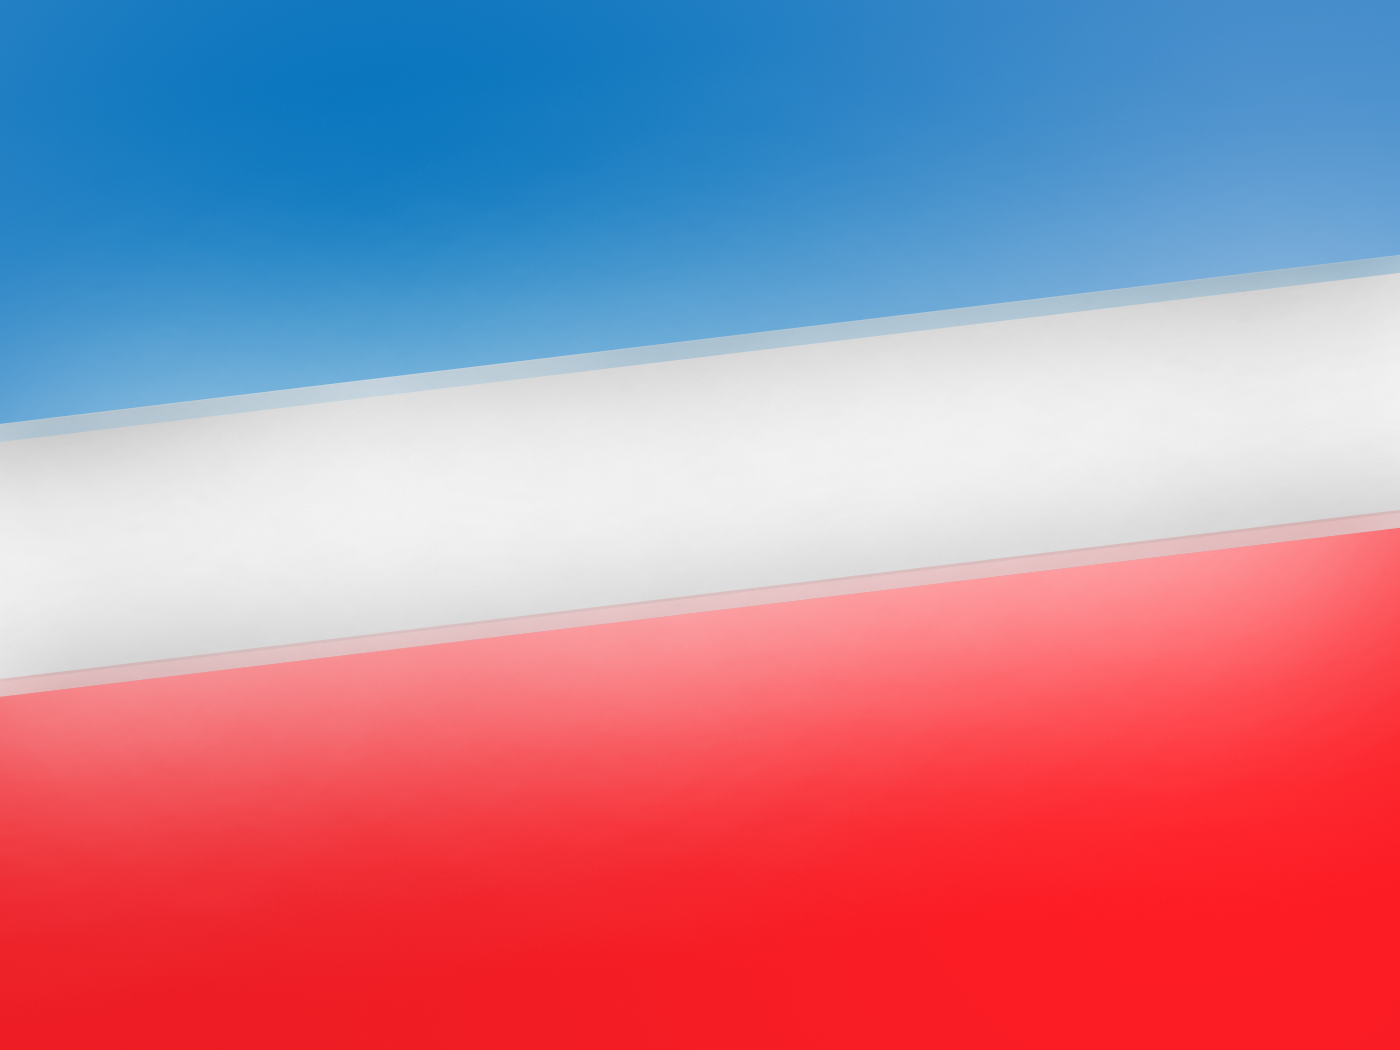 [66+] Red White And Blue Backgrounds on WallpaperSafari